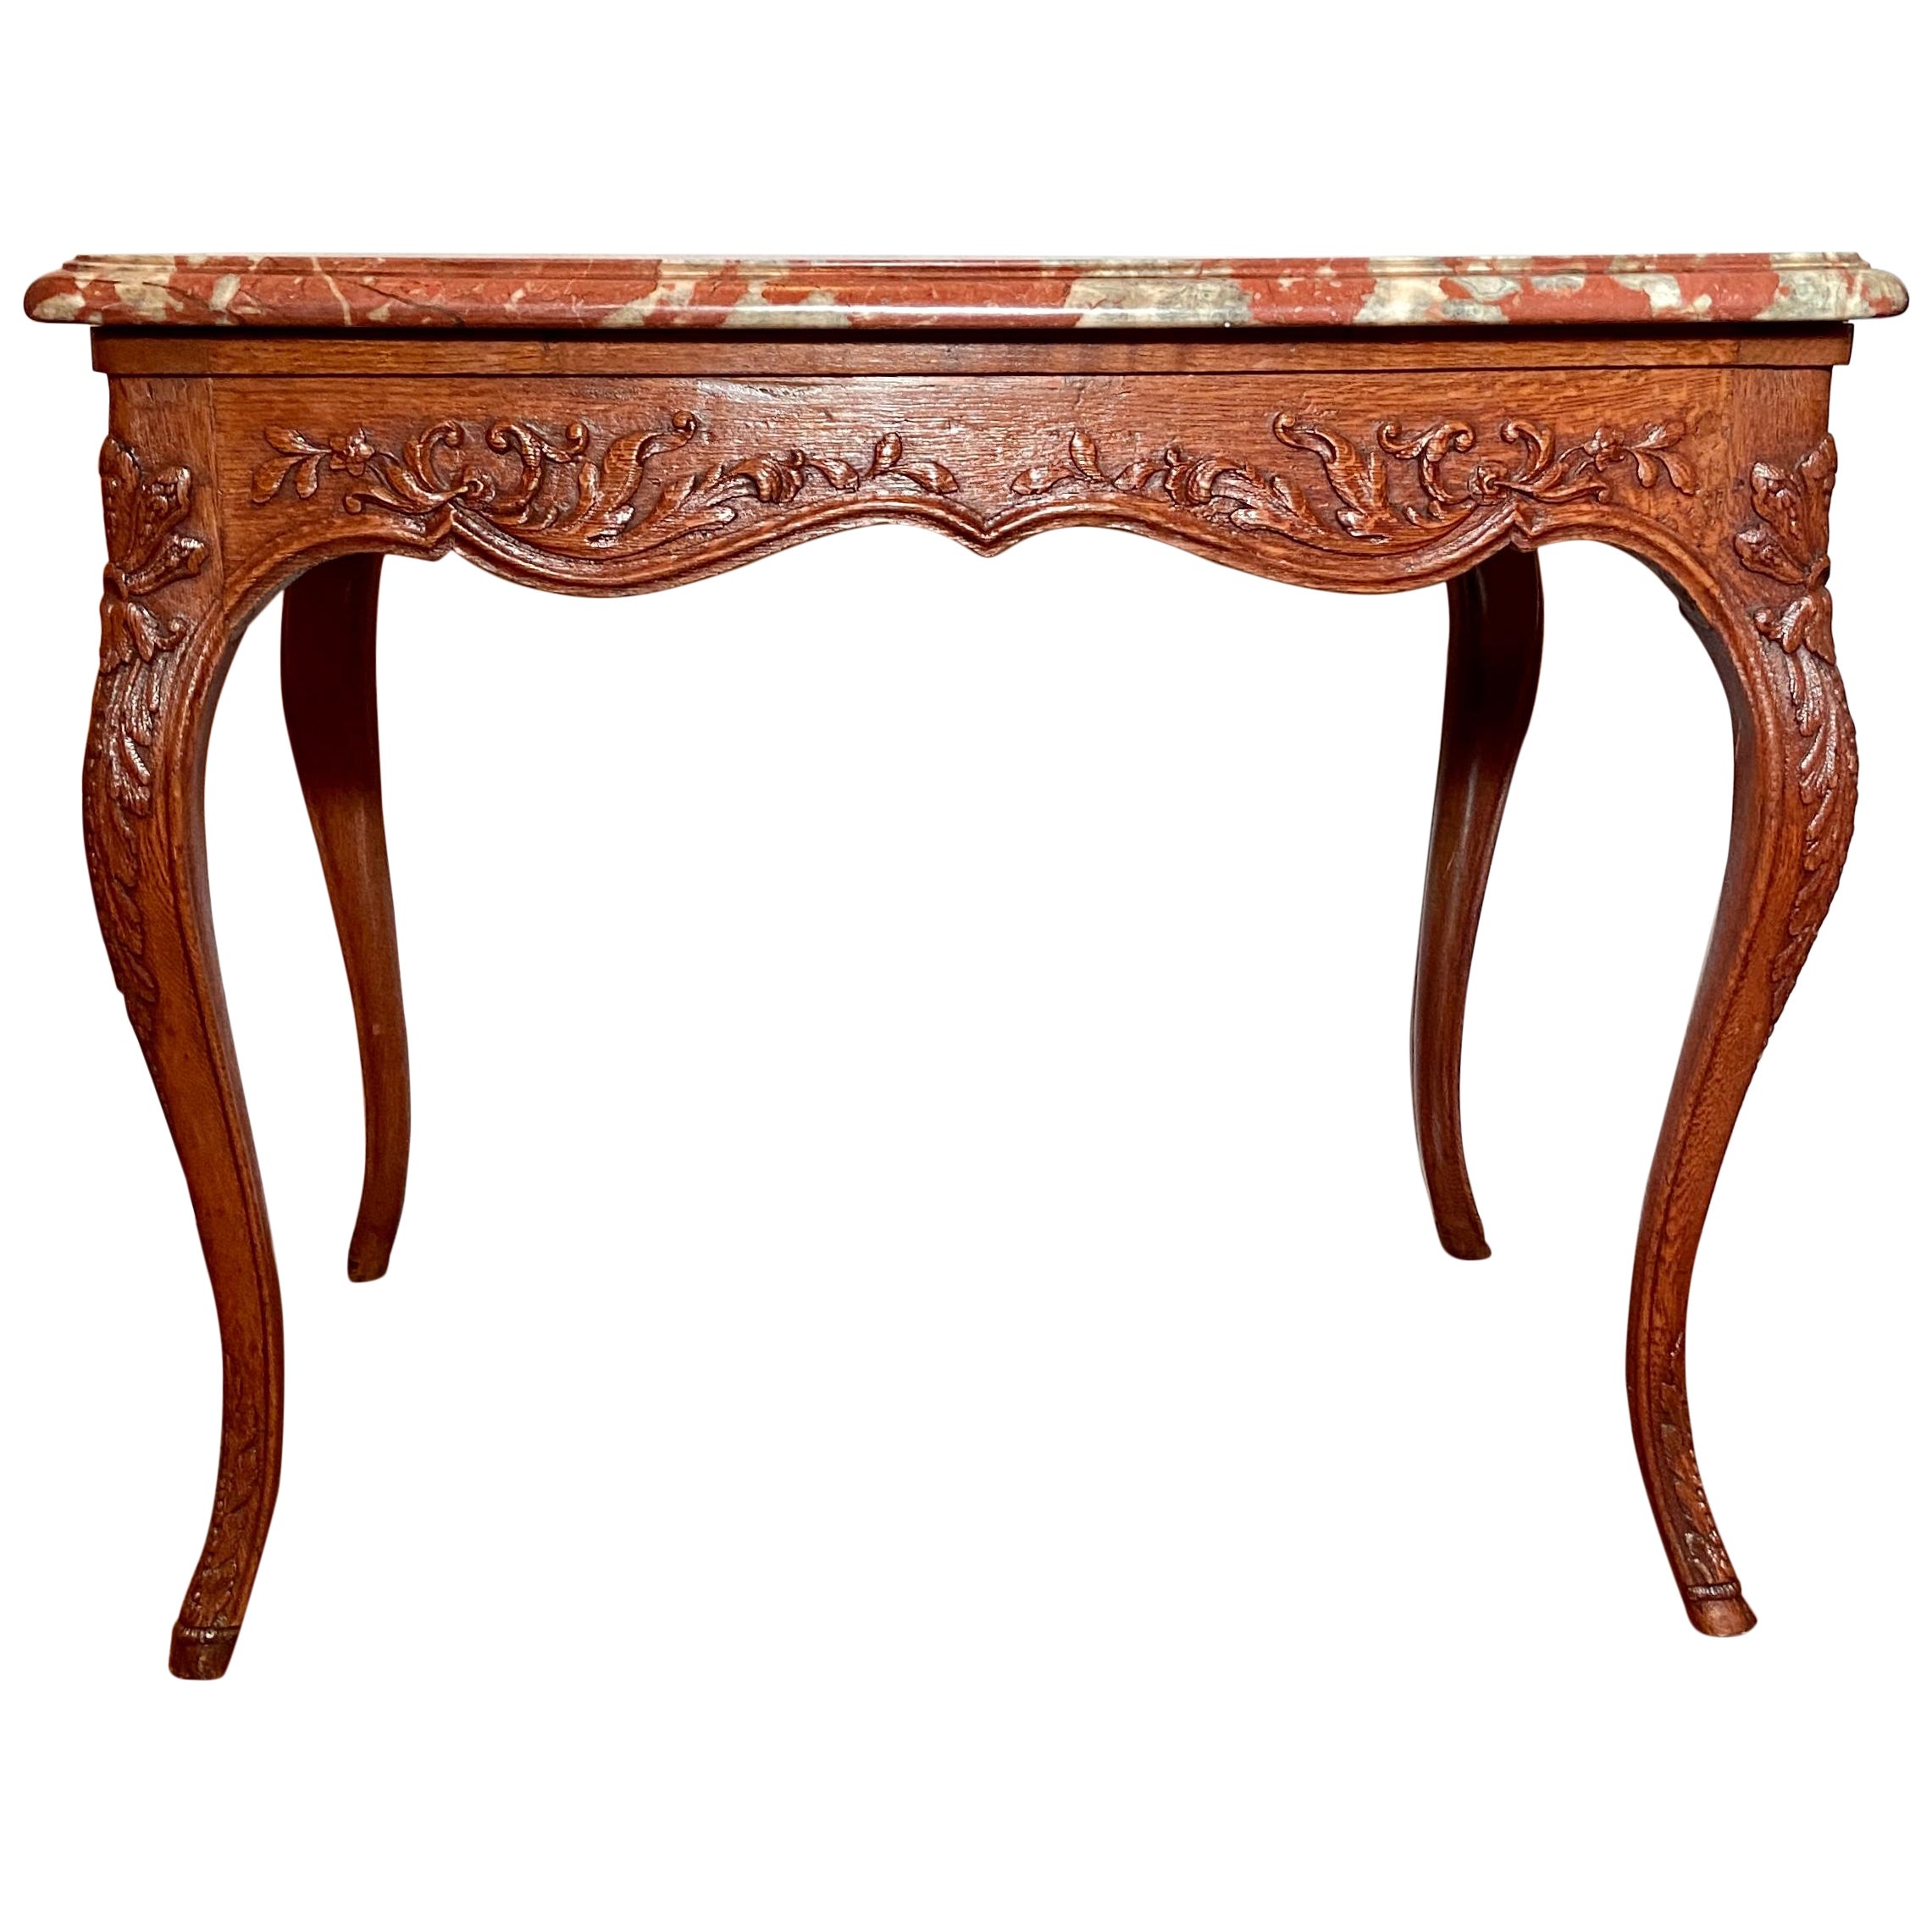 Antique French Provincial Carved Oak Marble Top Table, Circa 1860 For Sale